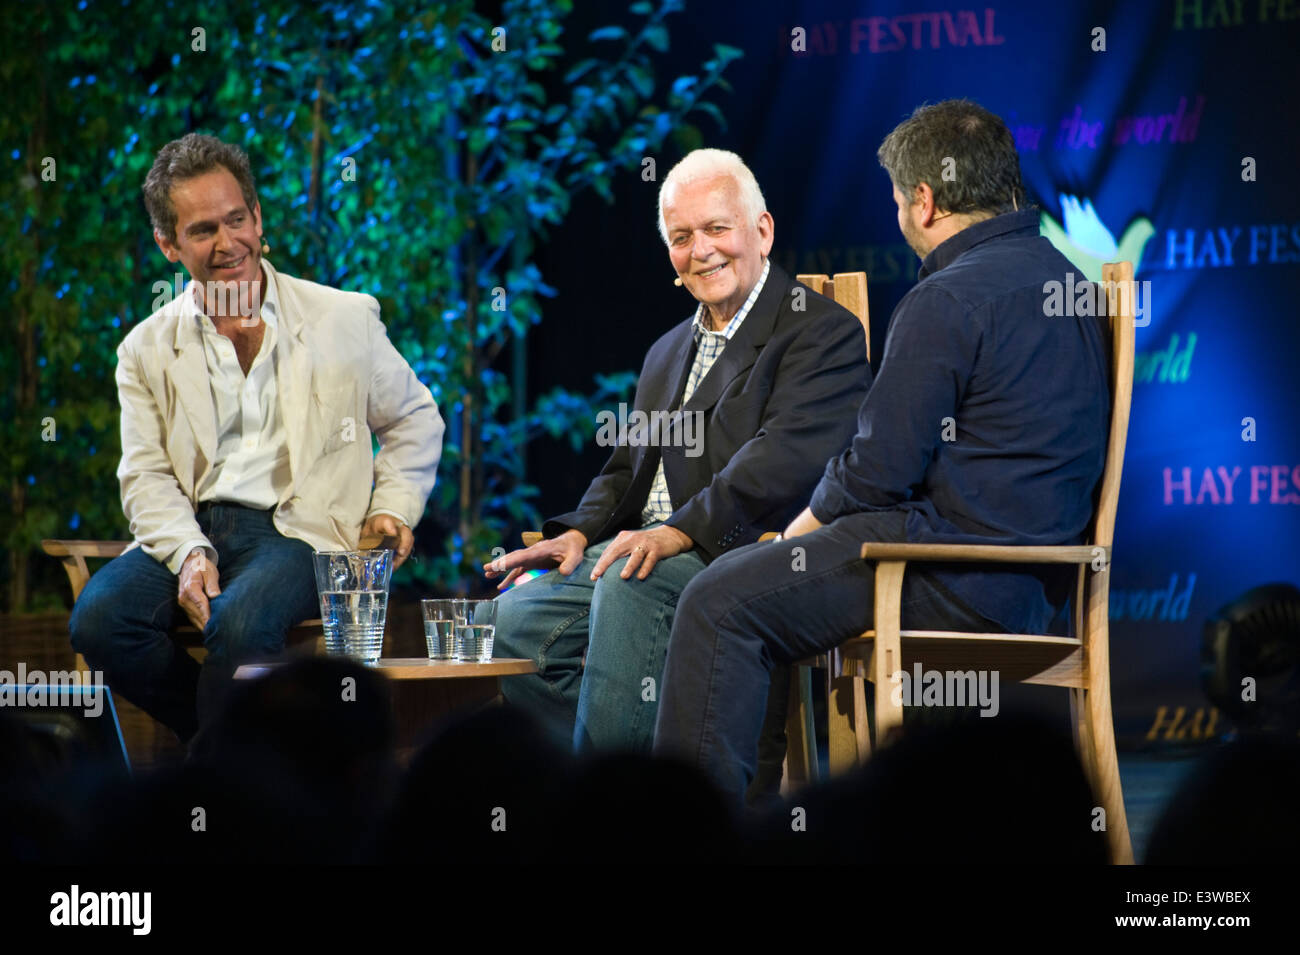 'A Poet in New York' discussion on stage at Hay Festival 2014. (l-r) Tom Hollander, Andrew Davies & Peter Florence. Stock Photo